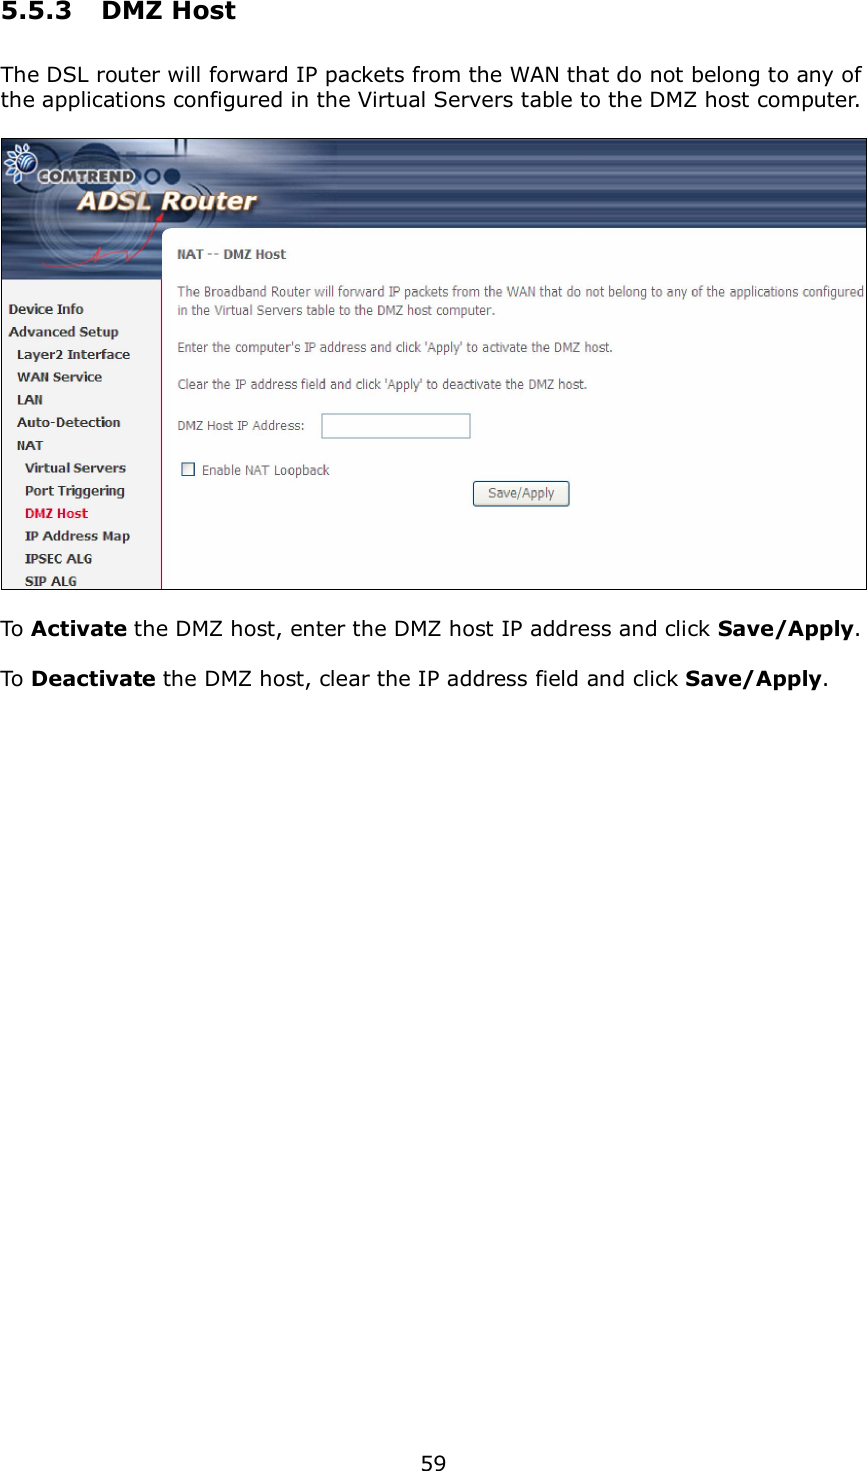  59 5.5.3  DMZ Host The DSL router will forward IP packets from the WAN that do not belong to any of the applications configured in the Virtual Servers table to the DMZ host computer.    To Activate the DMZ host, enter the DMZ host IP address and click Save/Apply.  To Deactivate the DMZ host, clear the IP address field and click Save/Apply.          